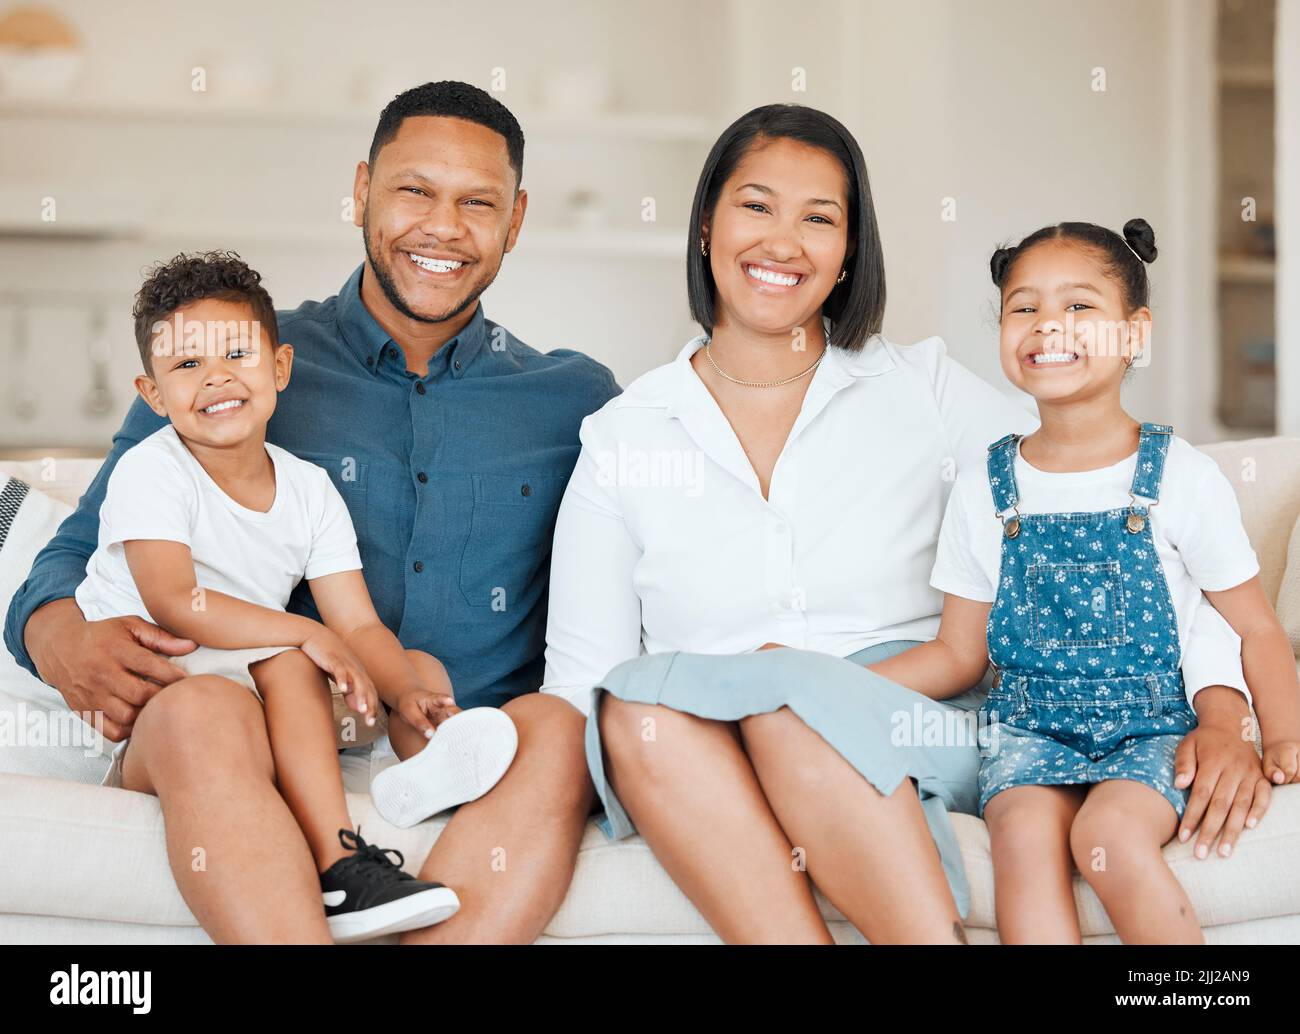 Family is forever. a young family happily bonding together on the sofa at home. Stock Photo